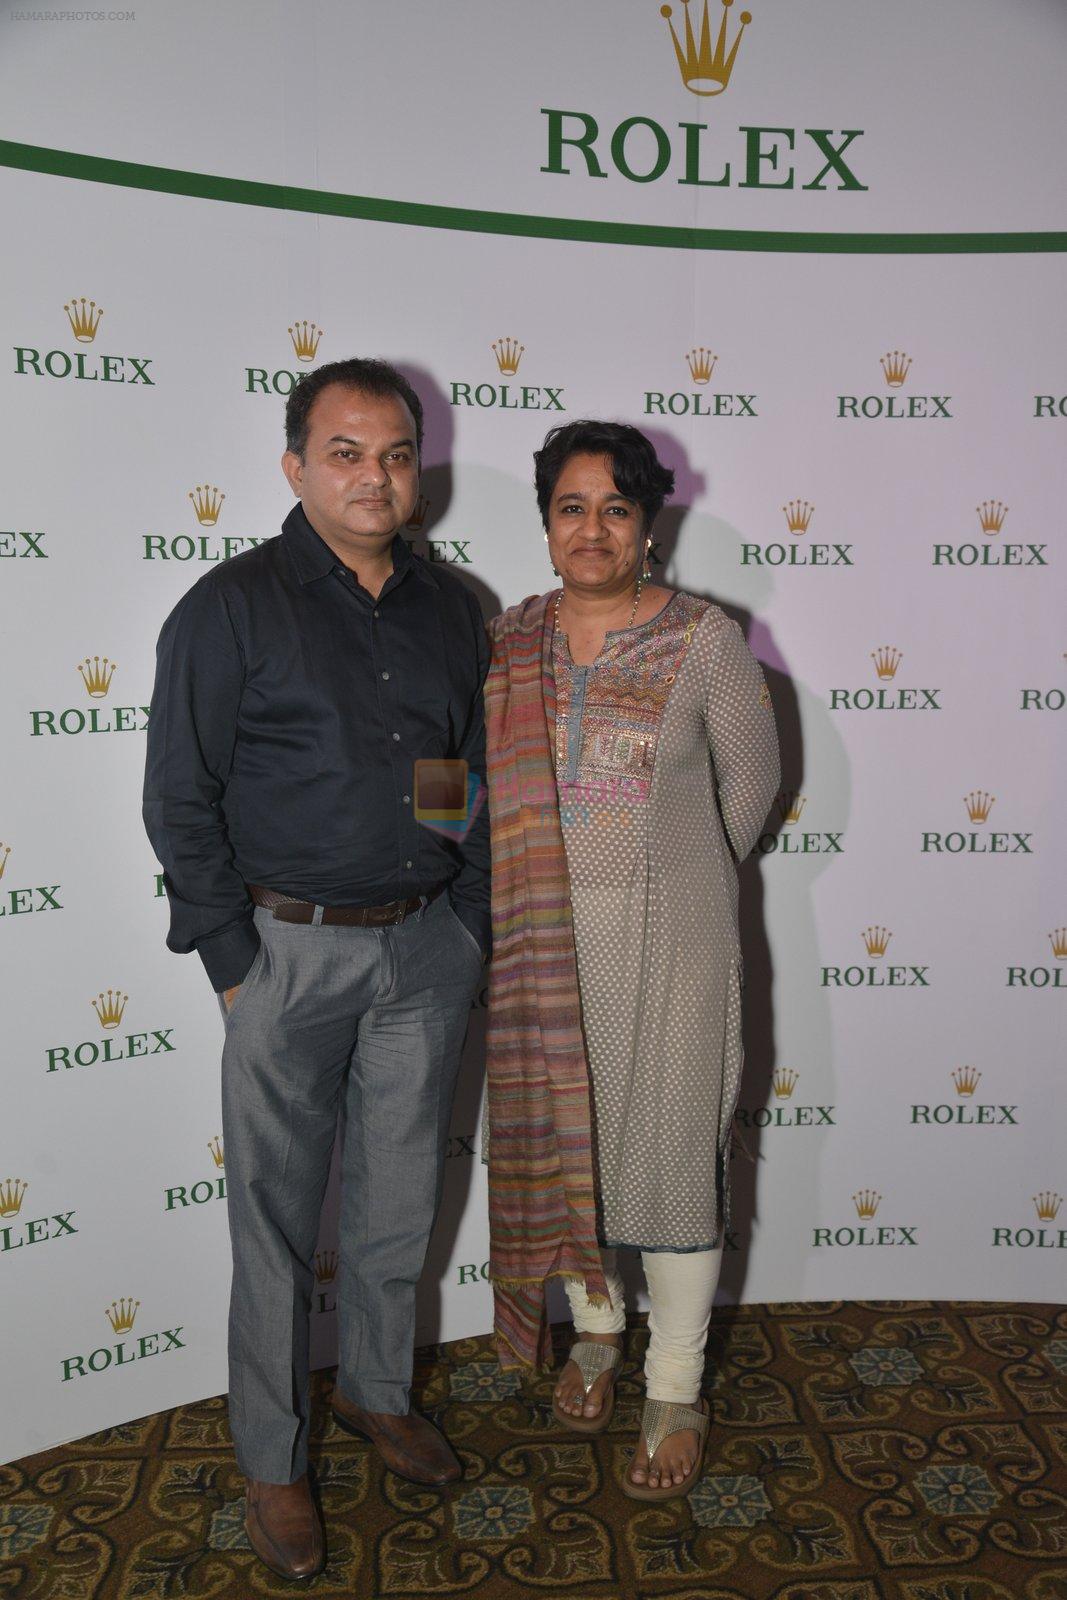 at Zubin Mehta dinner hosted by Rolex on 17th April 2016